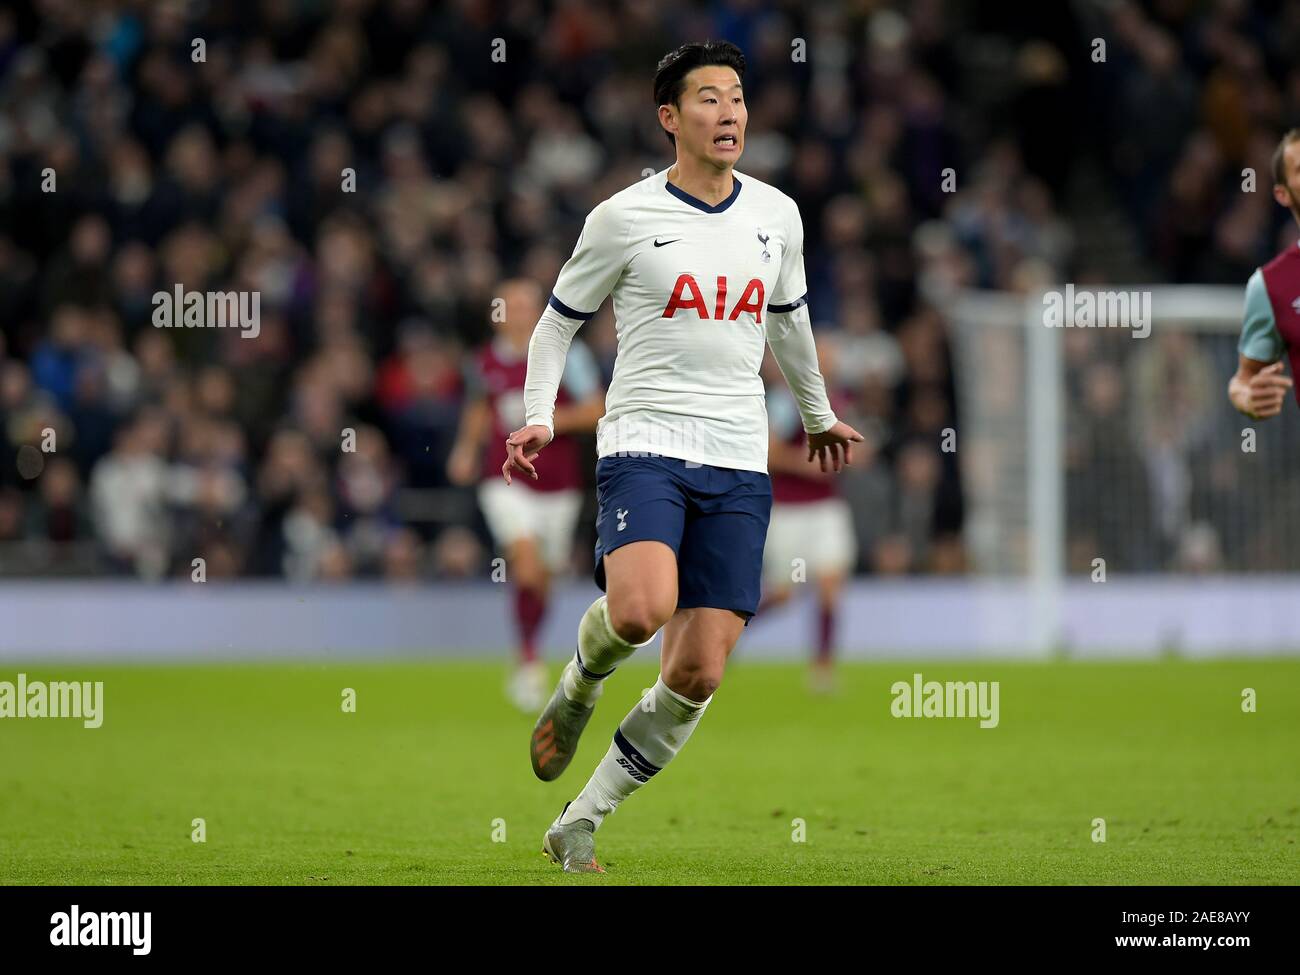 London, UK. 7th December 2019. Son Heung-Min of Tottenham Hotspur during the Tottenham Hotspur vs Burnley Premier League Football match at the Tottenham Hotspur Stadium on 7th December 2019-EDITORIAL USE ONLY No use with unauthorised audio, video, data, fixture lists (outside the EU), club/league logos or 'live' services. Online in-match use limited to 45 images (+15 in extra time). No use to emulate moving images. No use in betting, games or single club/league/player publications/services- Credit: Martin Dalton/Alamy Live News Stock Photo